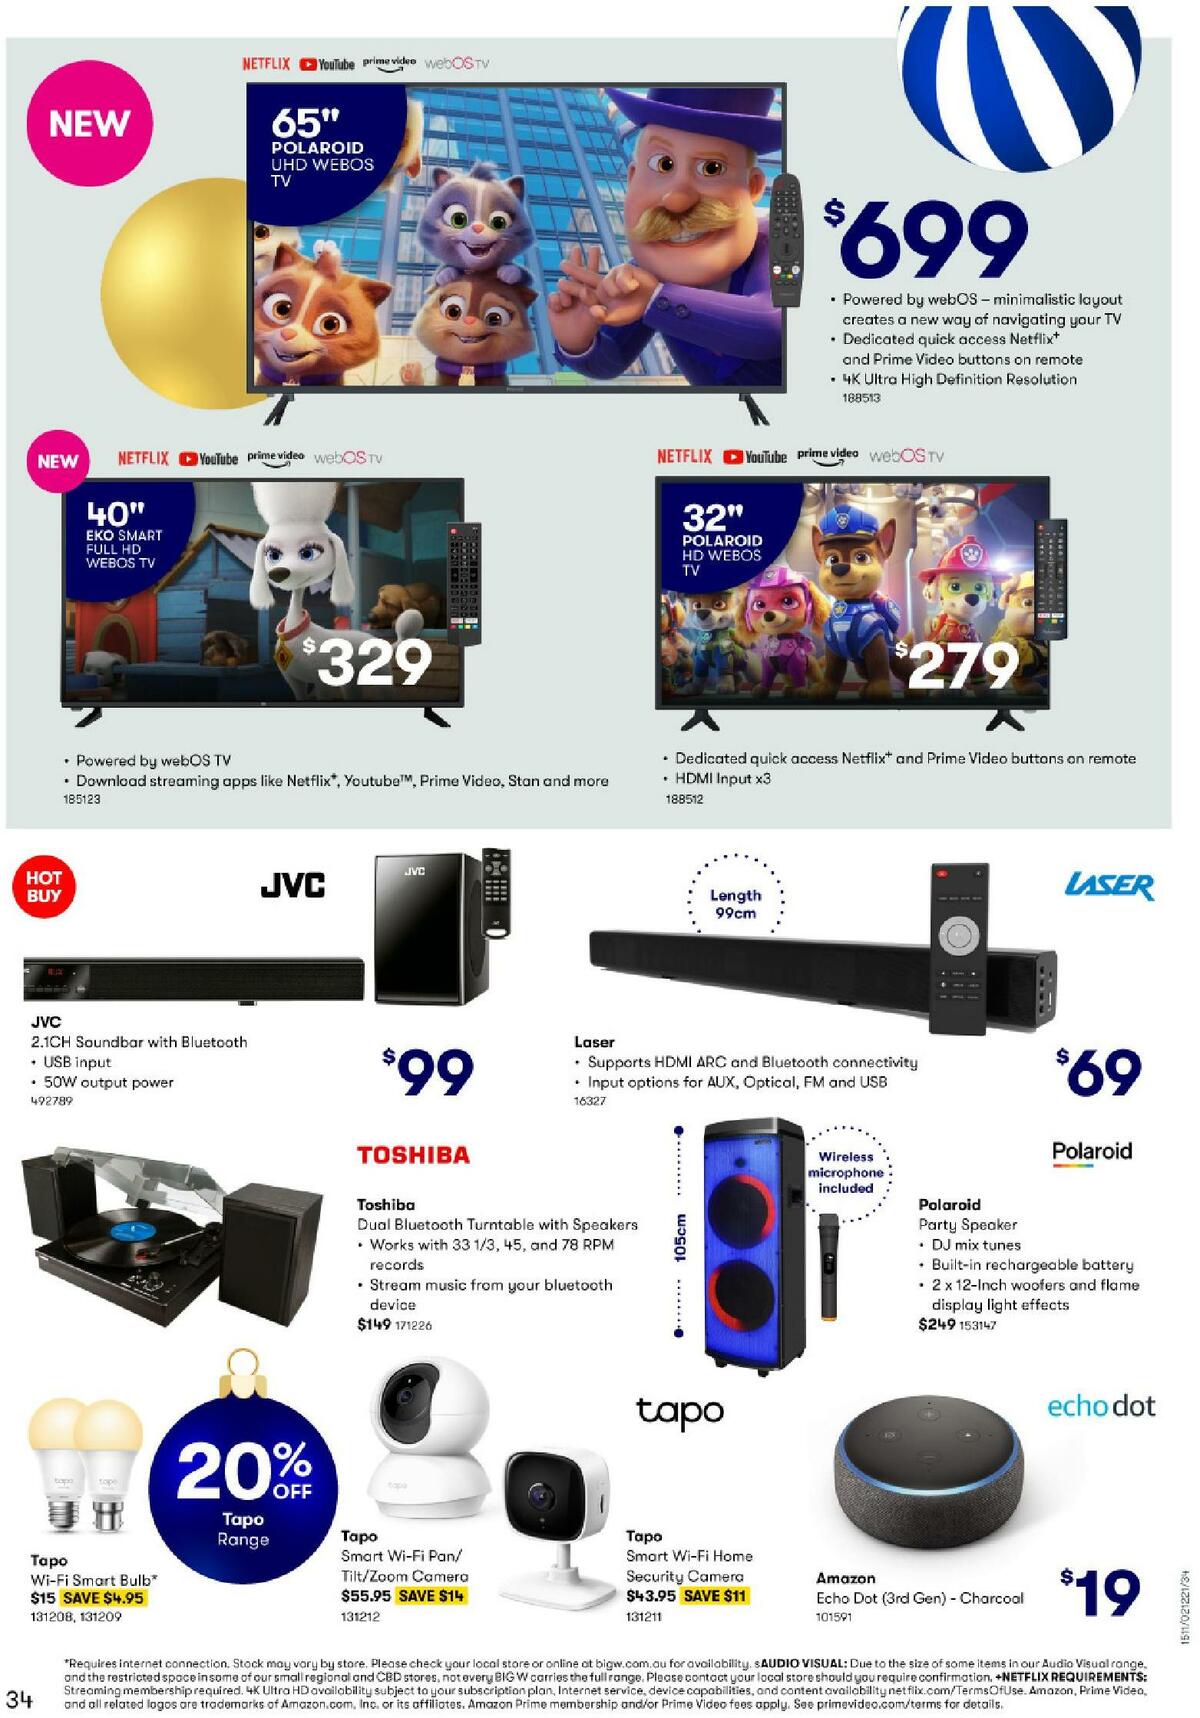 Big W Catalogues from 2 December